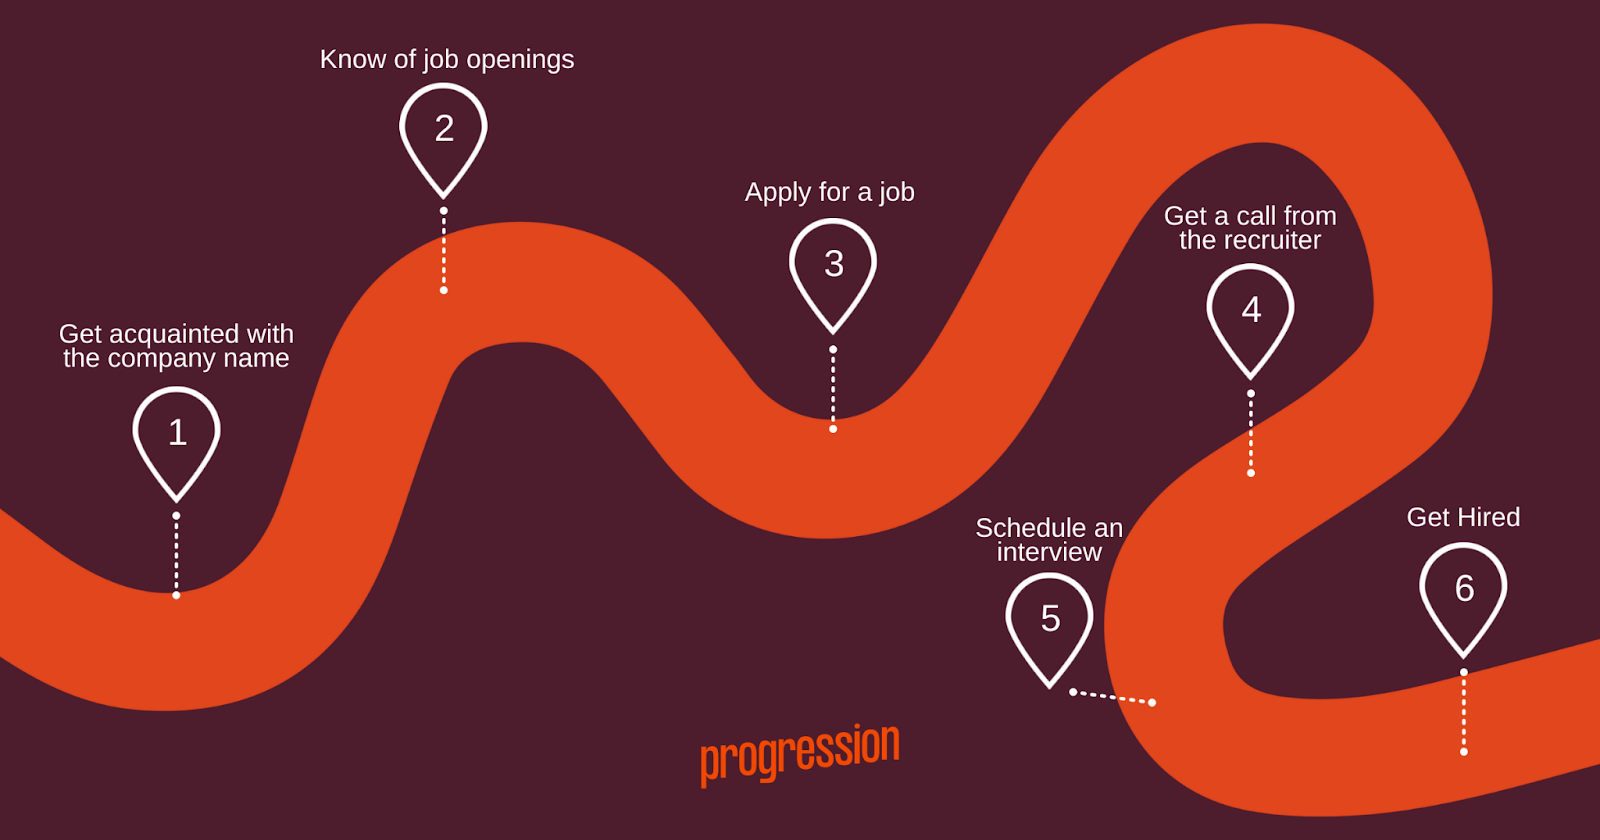 Roadmap of the hiring process: Employee's perspective